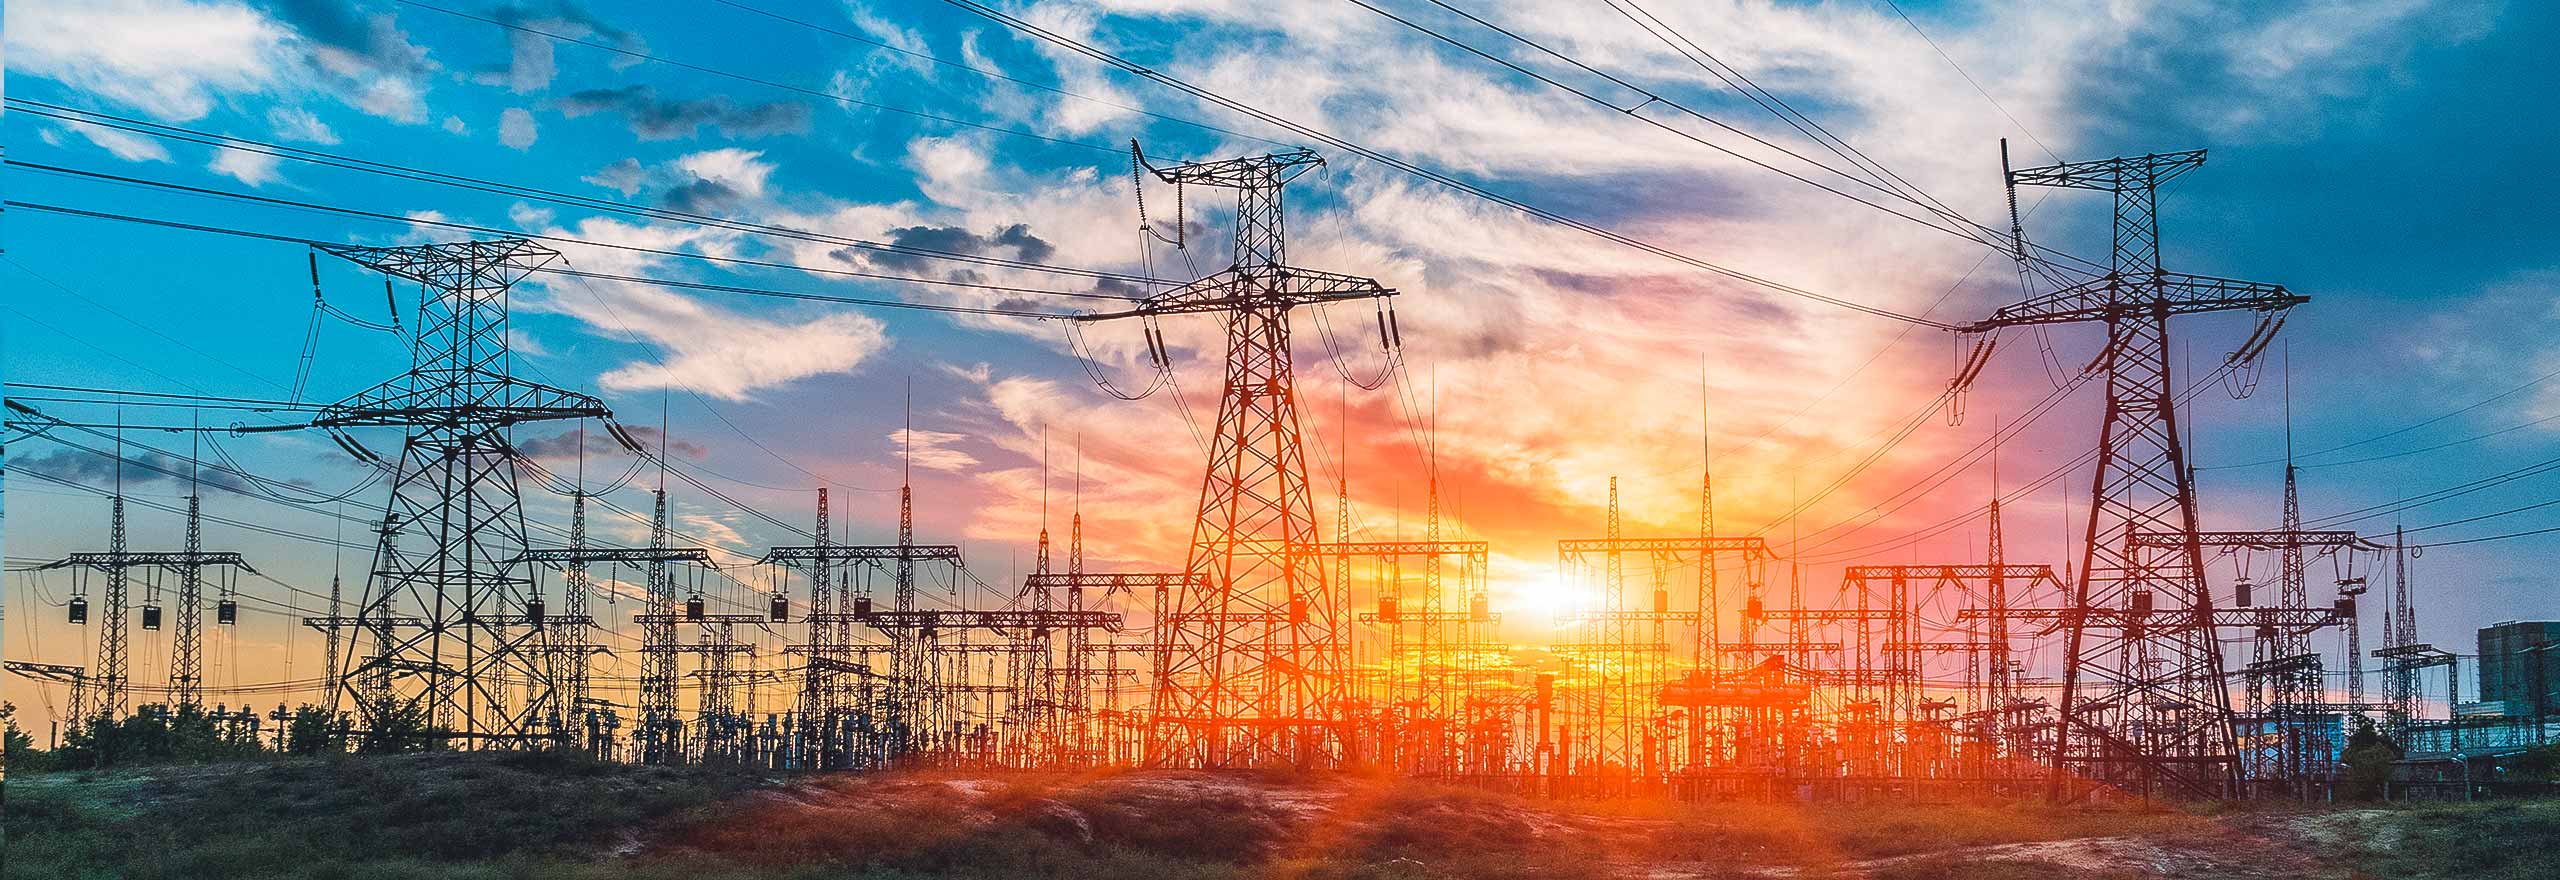 Distribution electric substation with power lines and transformers at sunset